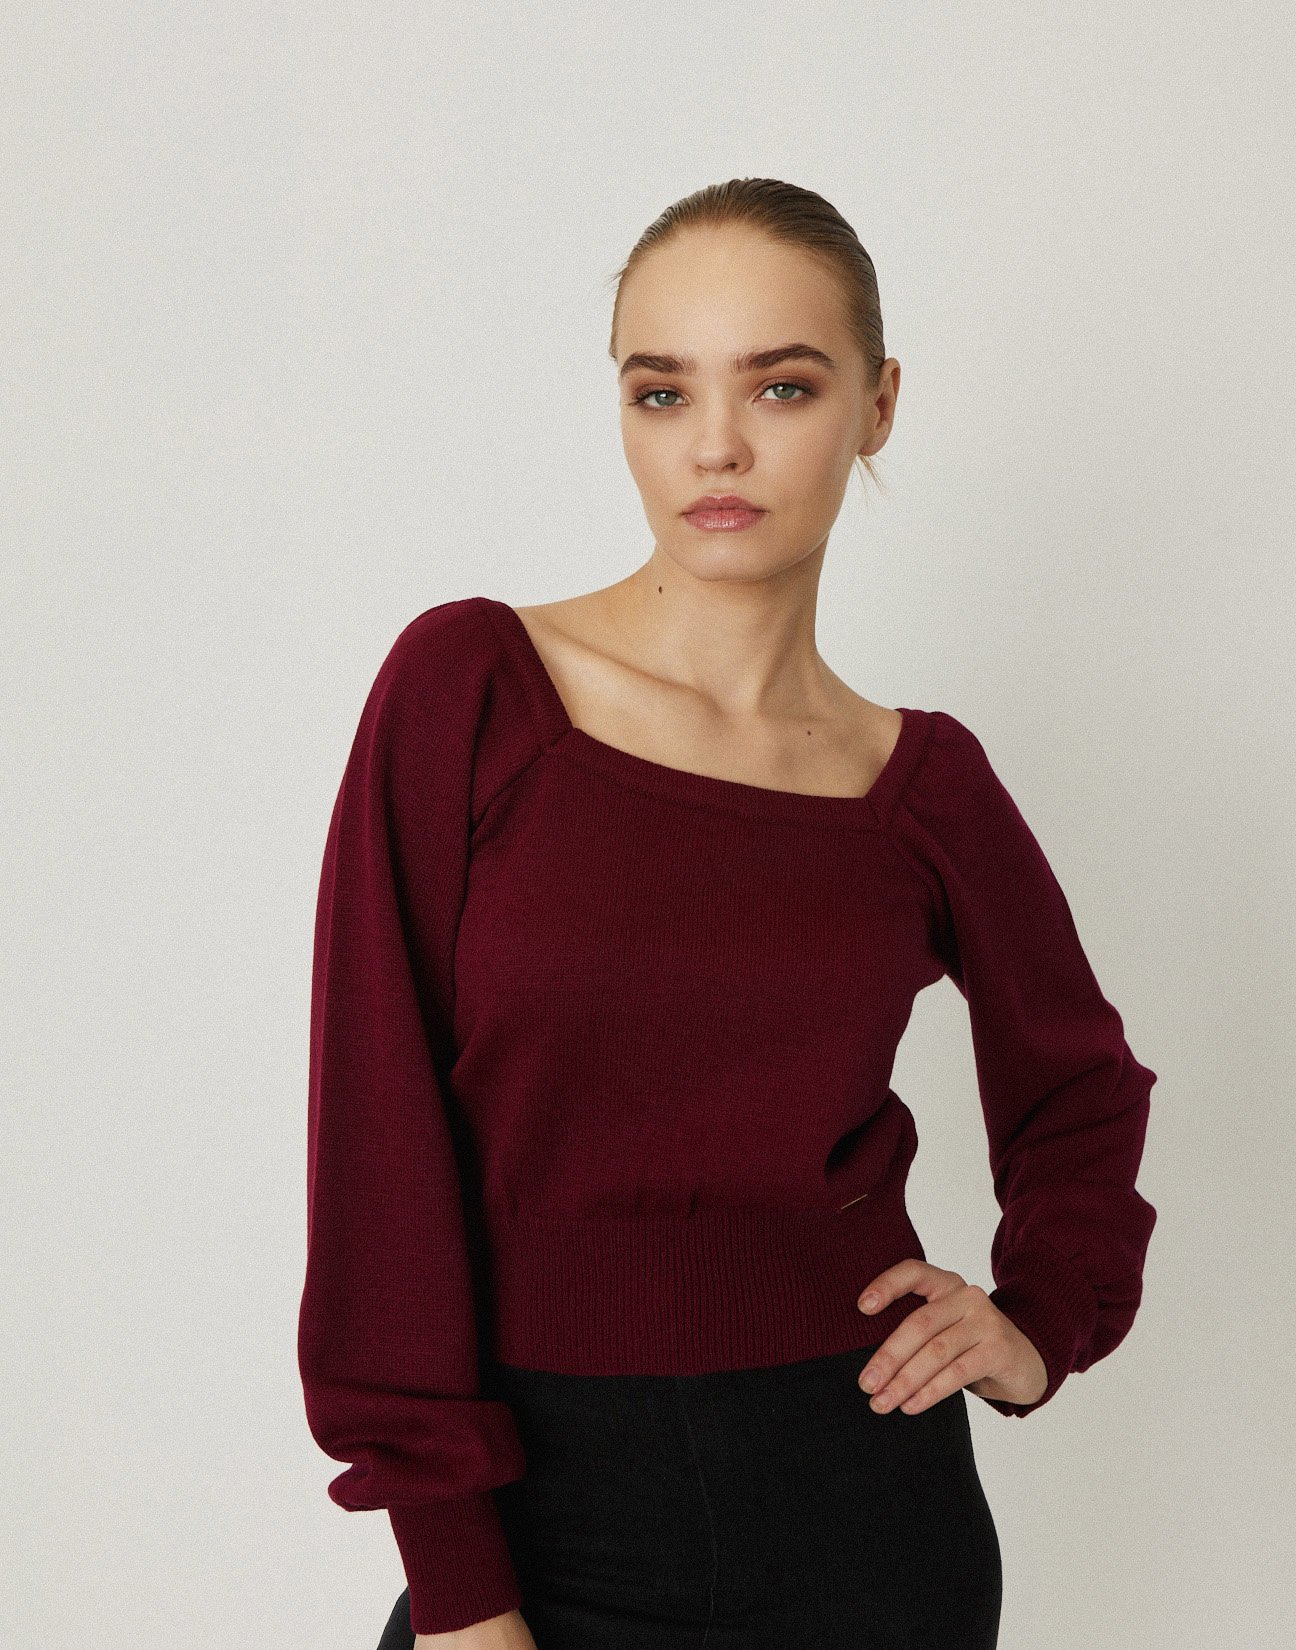 Knit sweater with square-cut neck